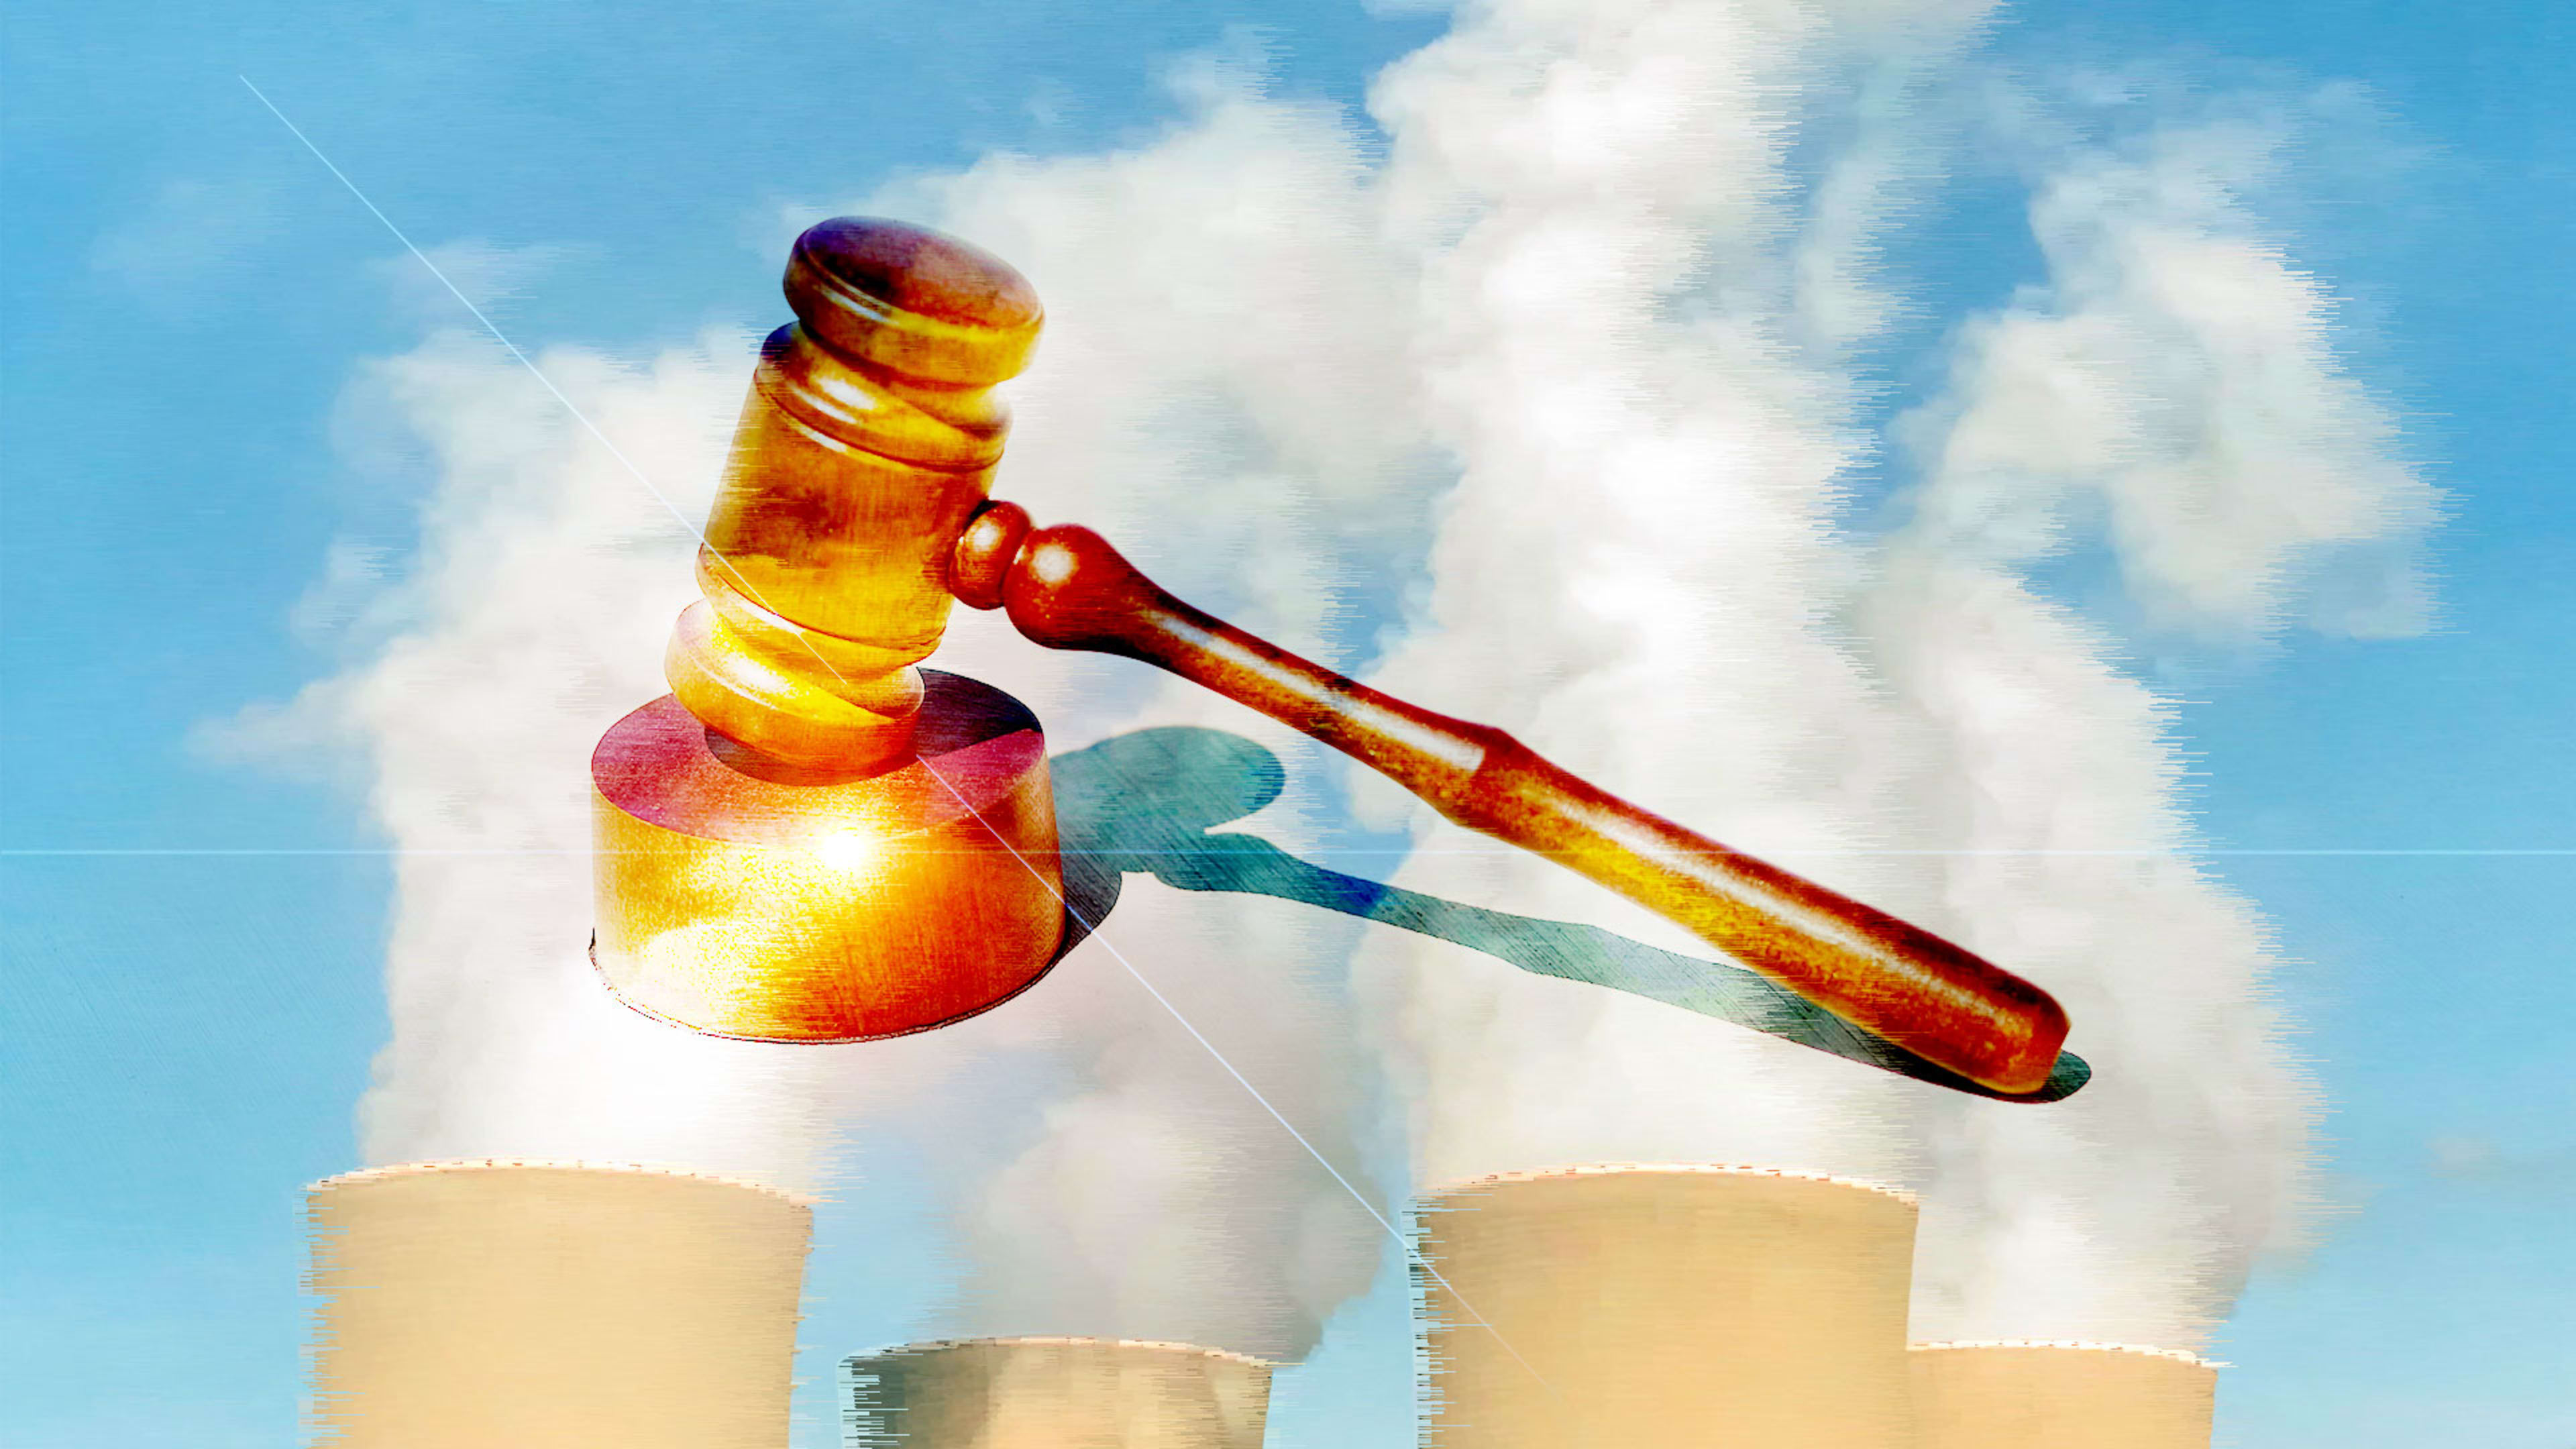 The Supreme Court just seriously limited the government’s ability to fight climate change